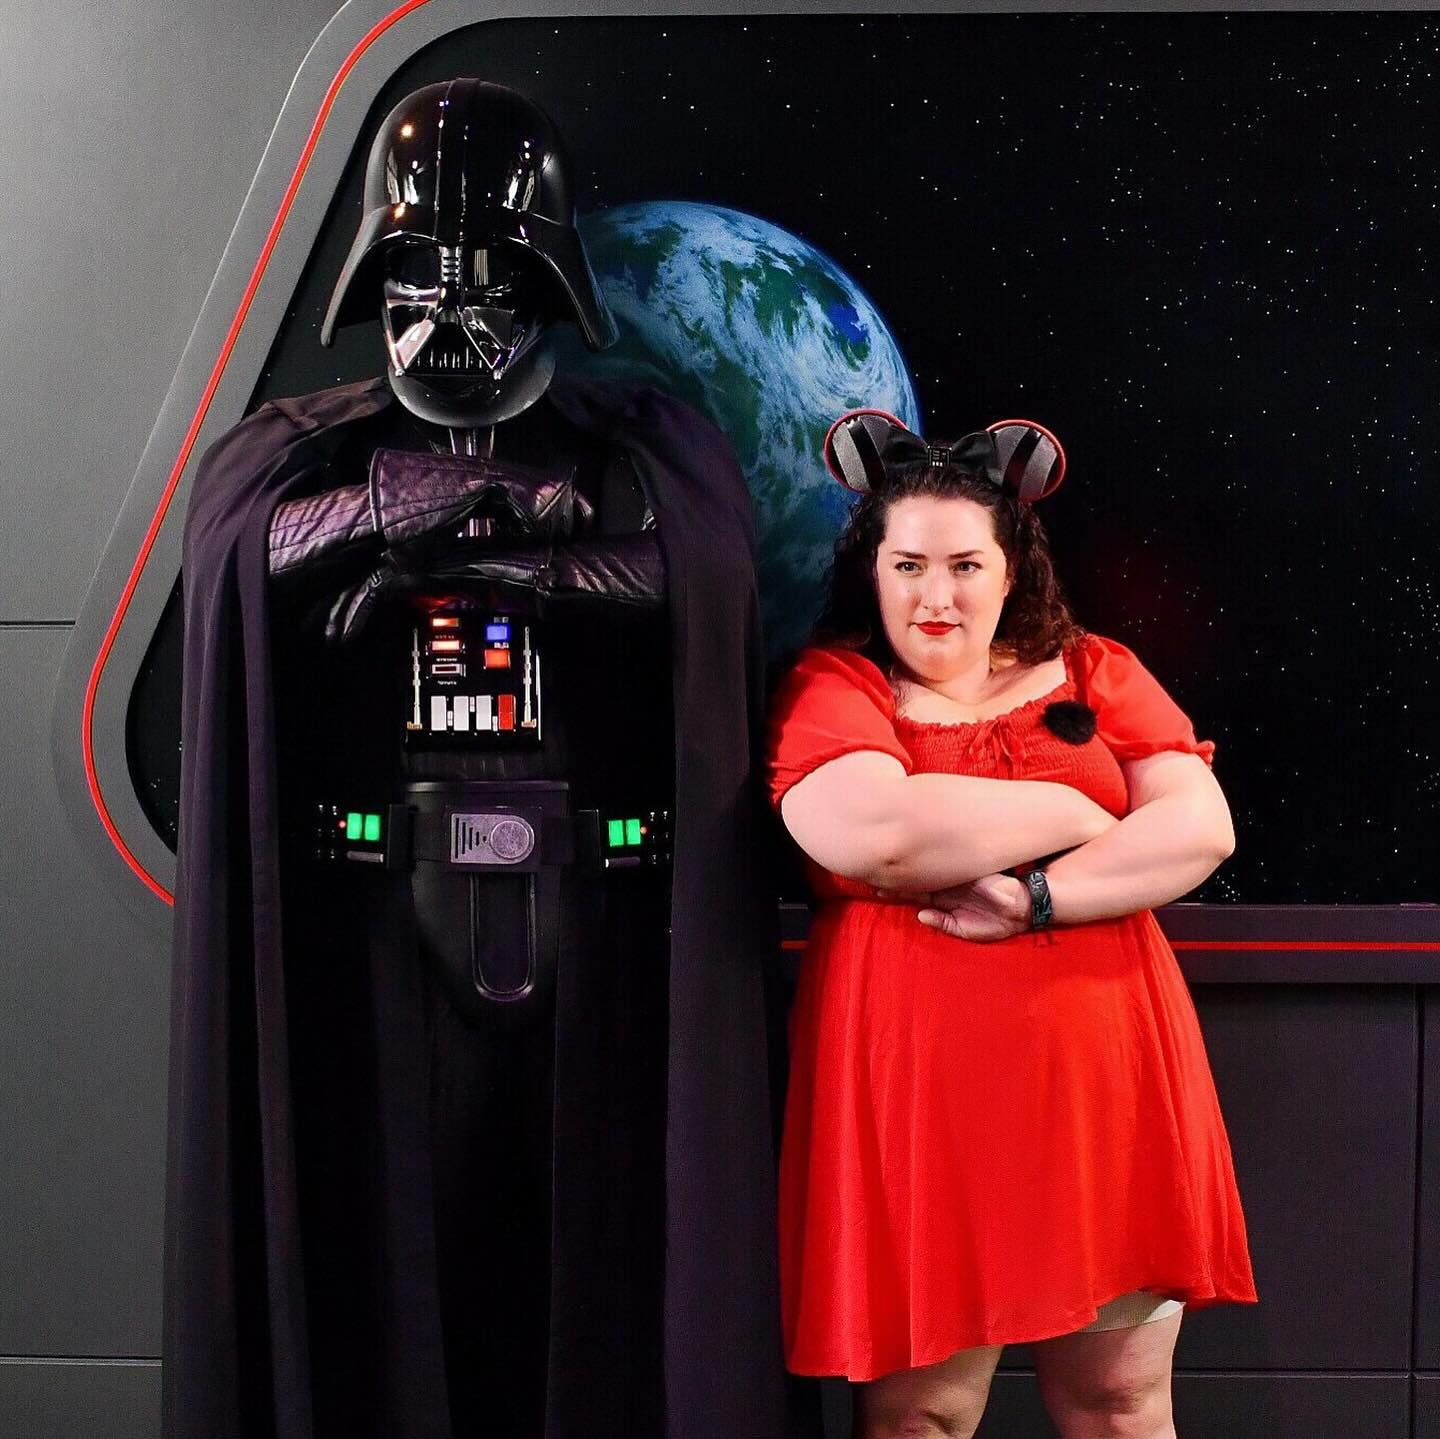 Just two besties on Revenge of the 5th 🖤💫 

This was my first time meeting Darth Vader and the experience was awesome! Have you met him before in the parks?

#revengeofthefifth #darthvader #starwars #starwarslaunchbay #disneyshollywoodstudios